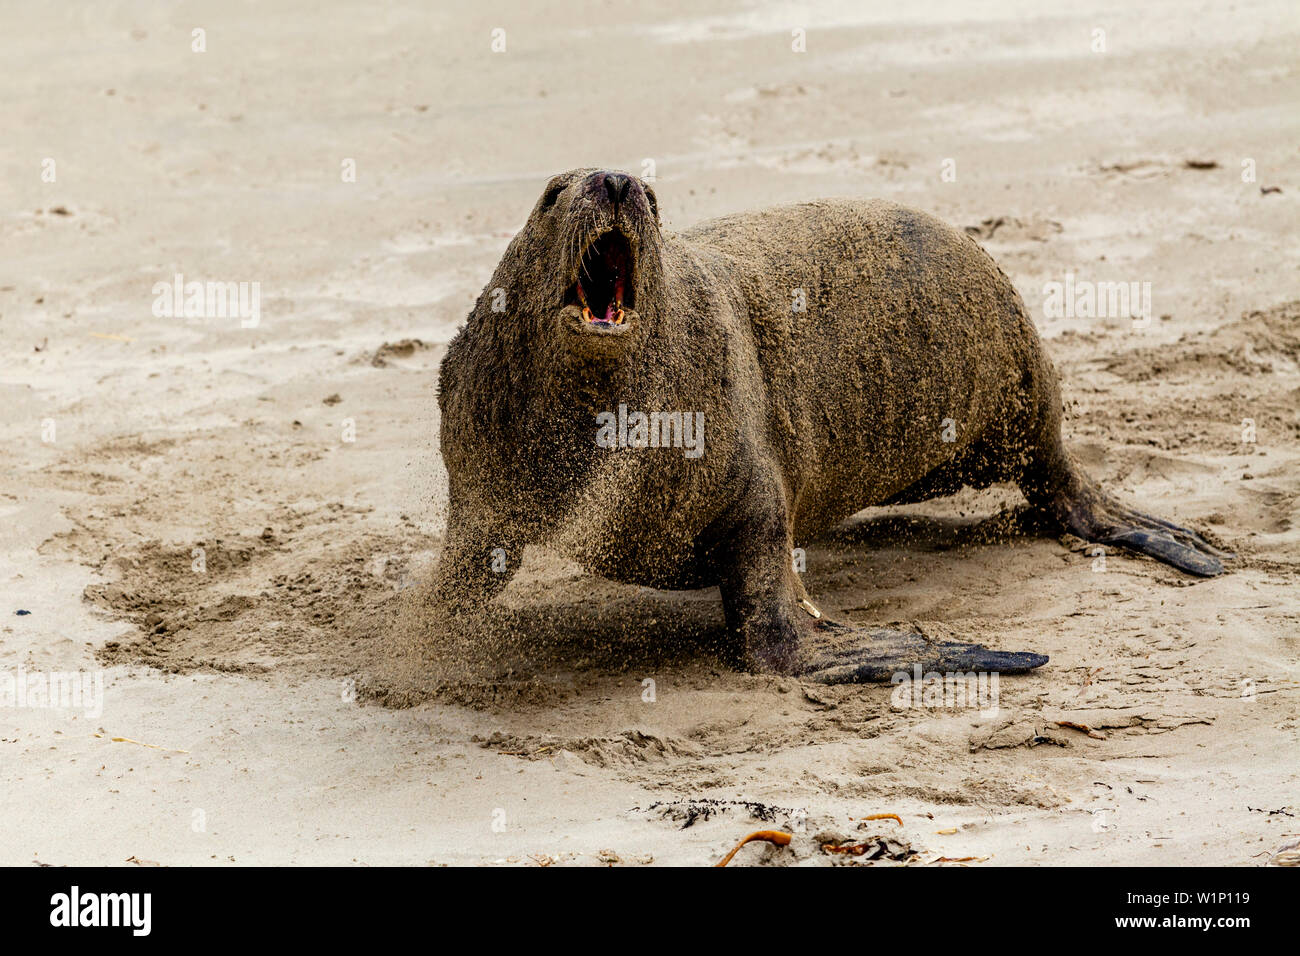 An Aggressive Sea Lion On The Beach At Surat Bay, The Catlins, South Island, New Zealand Stock Photo